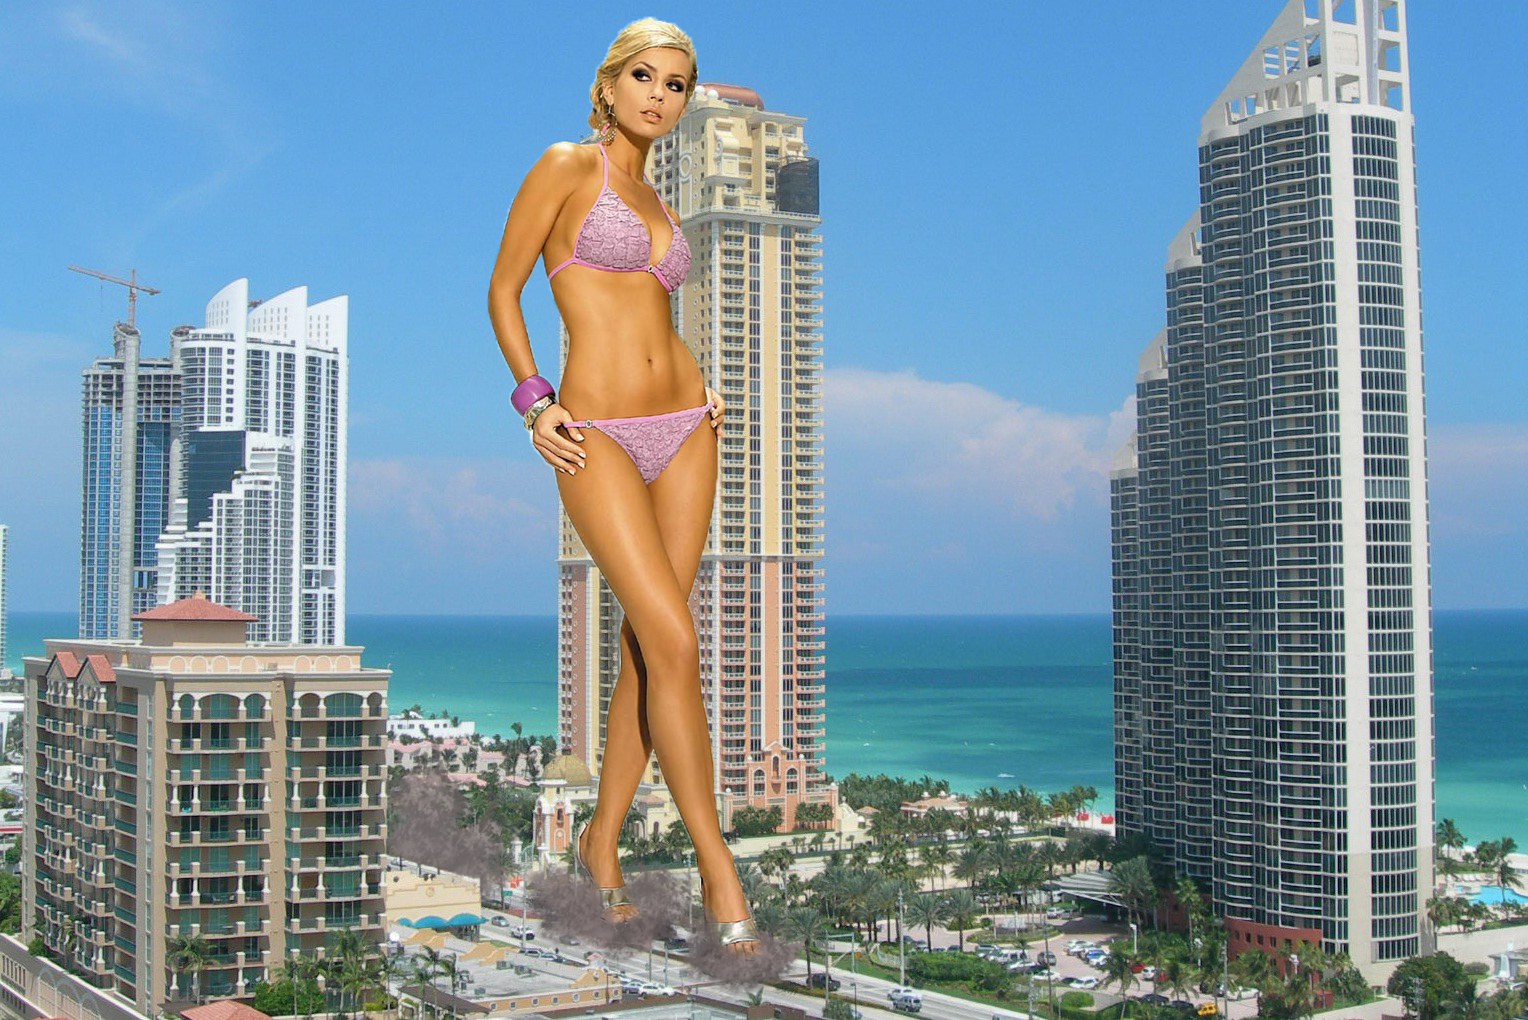 Giantess In The City 10 By Lala222221 On DeviantArt.